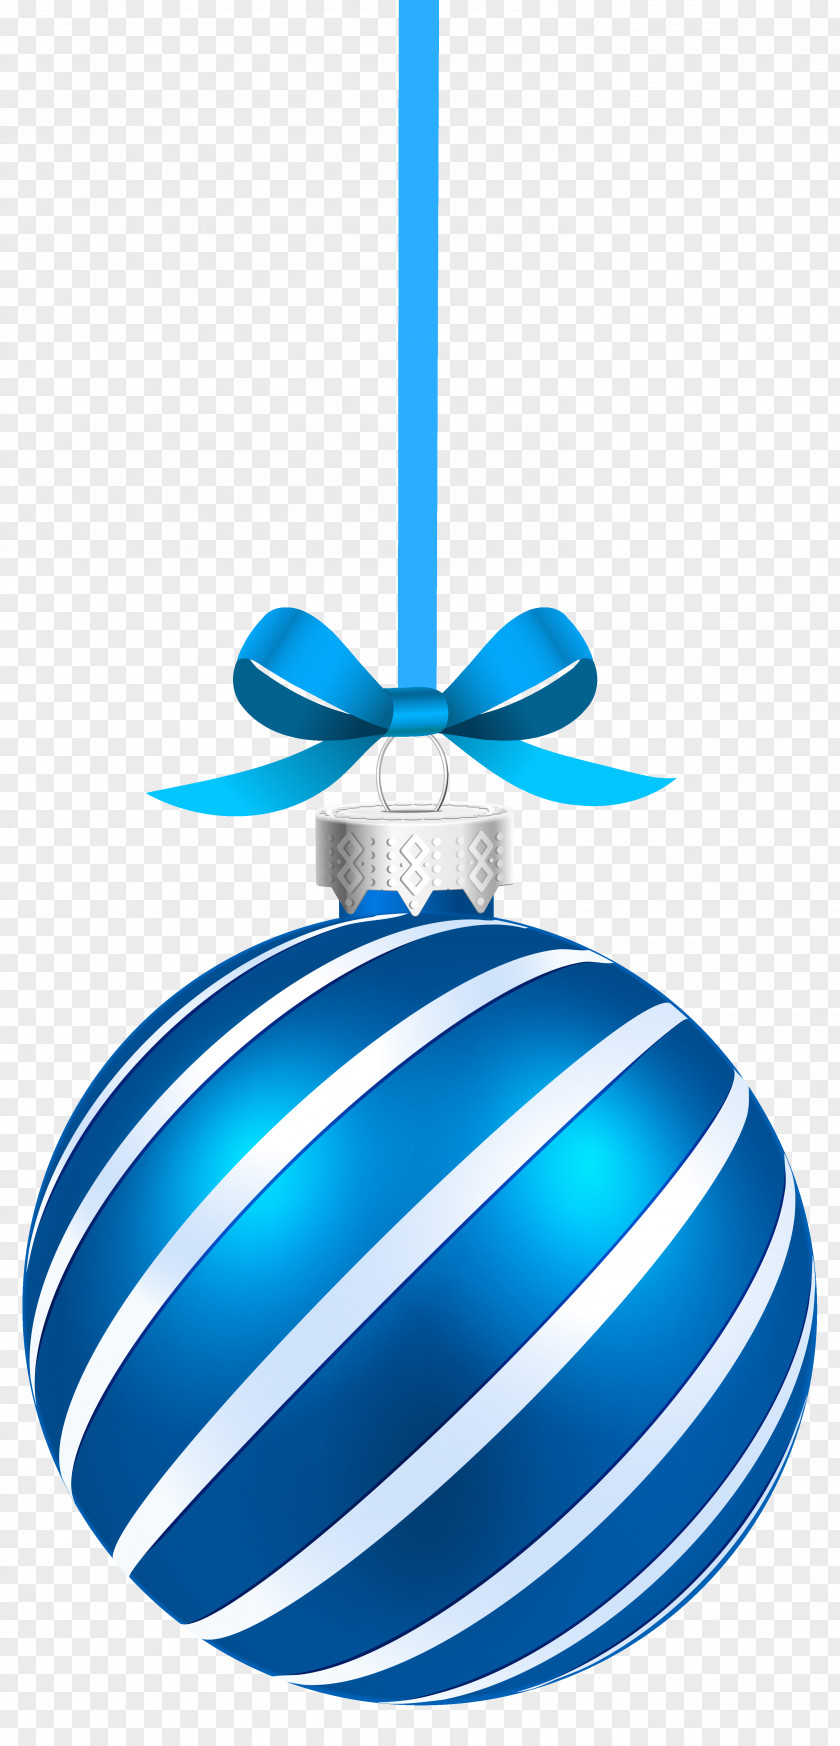 Blue Sriped Christmas Hanging Ball Clipart Image Ornament Decoration Santa Claus Clip Art PNG